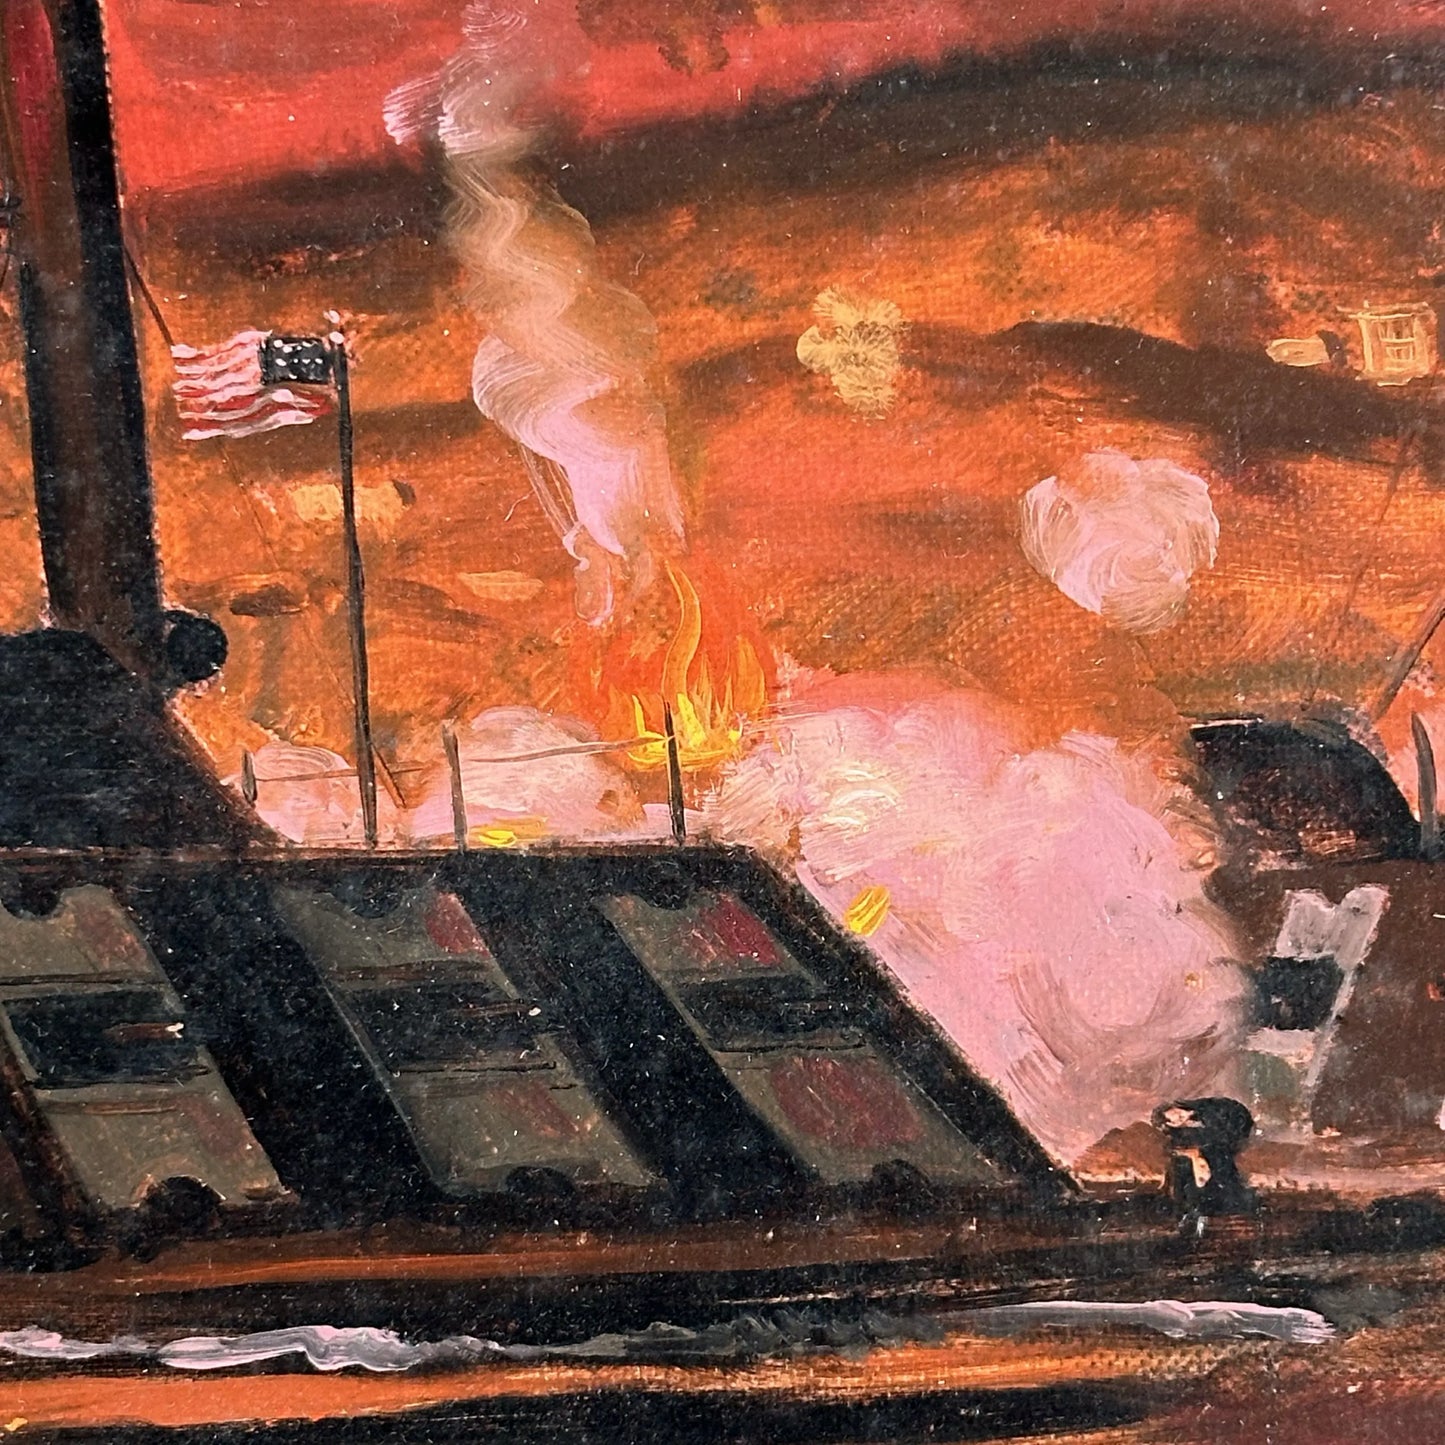 Original oil painting of key point in the Civil War: “Ironclads steaming past Vicksburg”